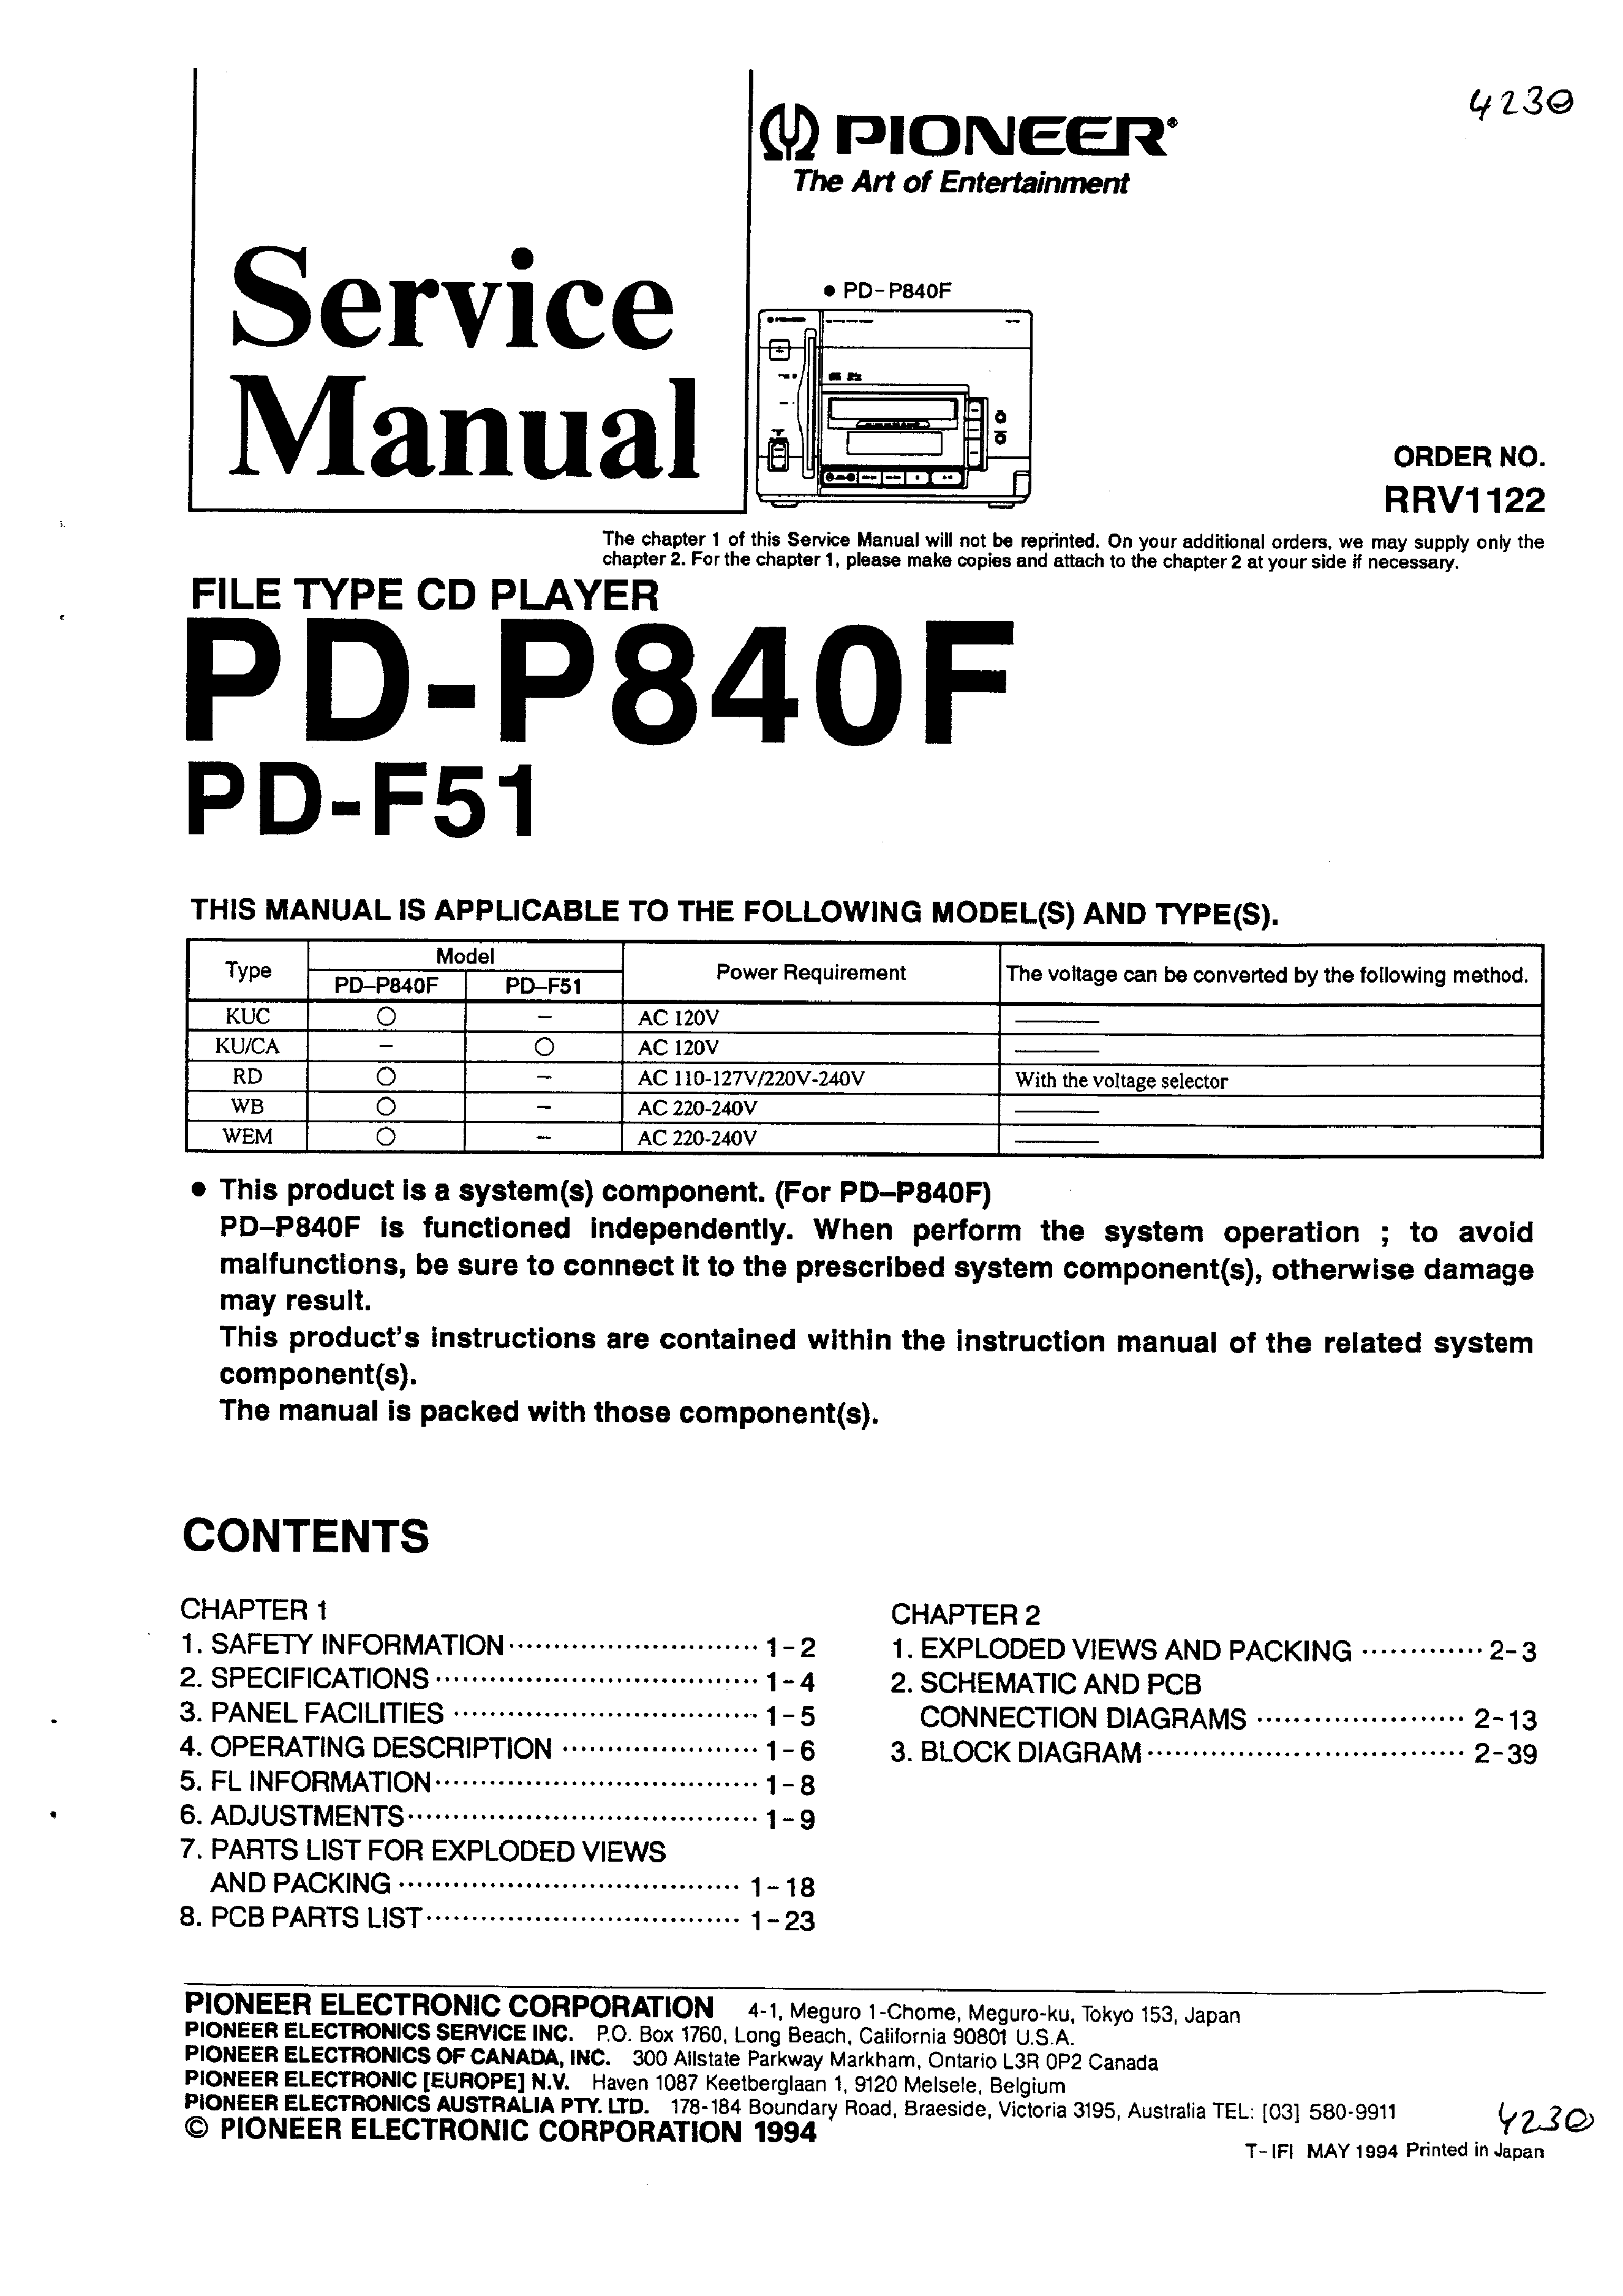 Service Manual for PIONEER PD-P840F-K - Download